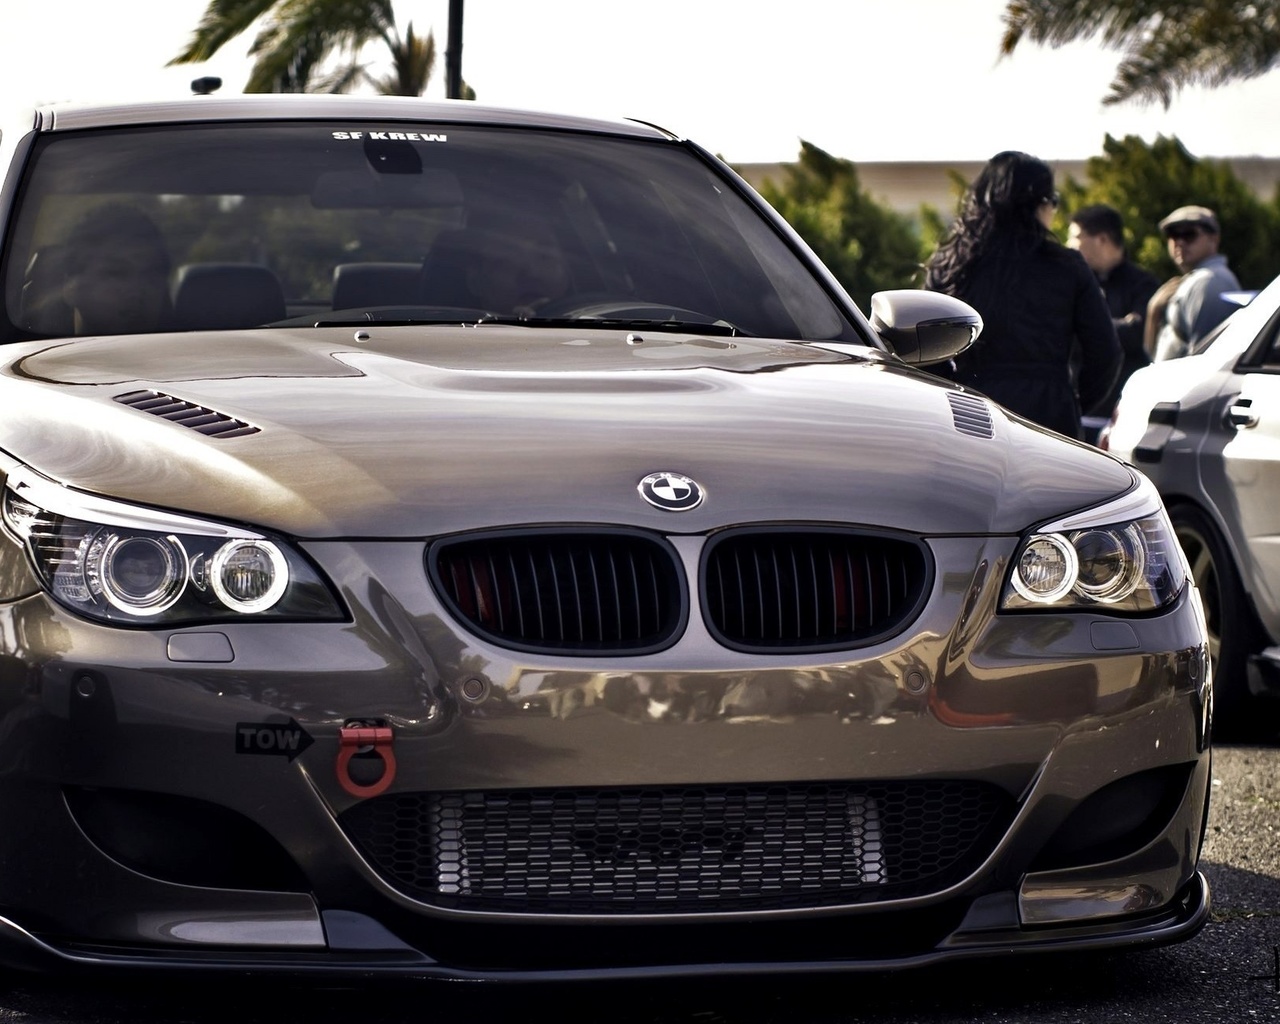 m5, e60, bmw, tuning, automobile, germany, , Car, wallpapers, beautiful